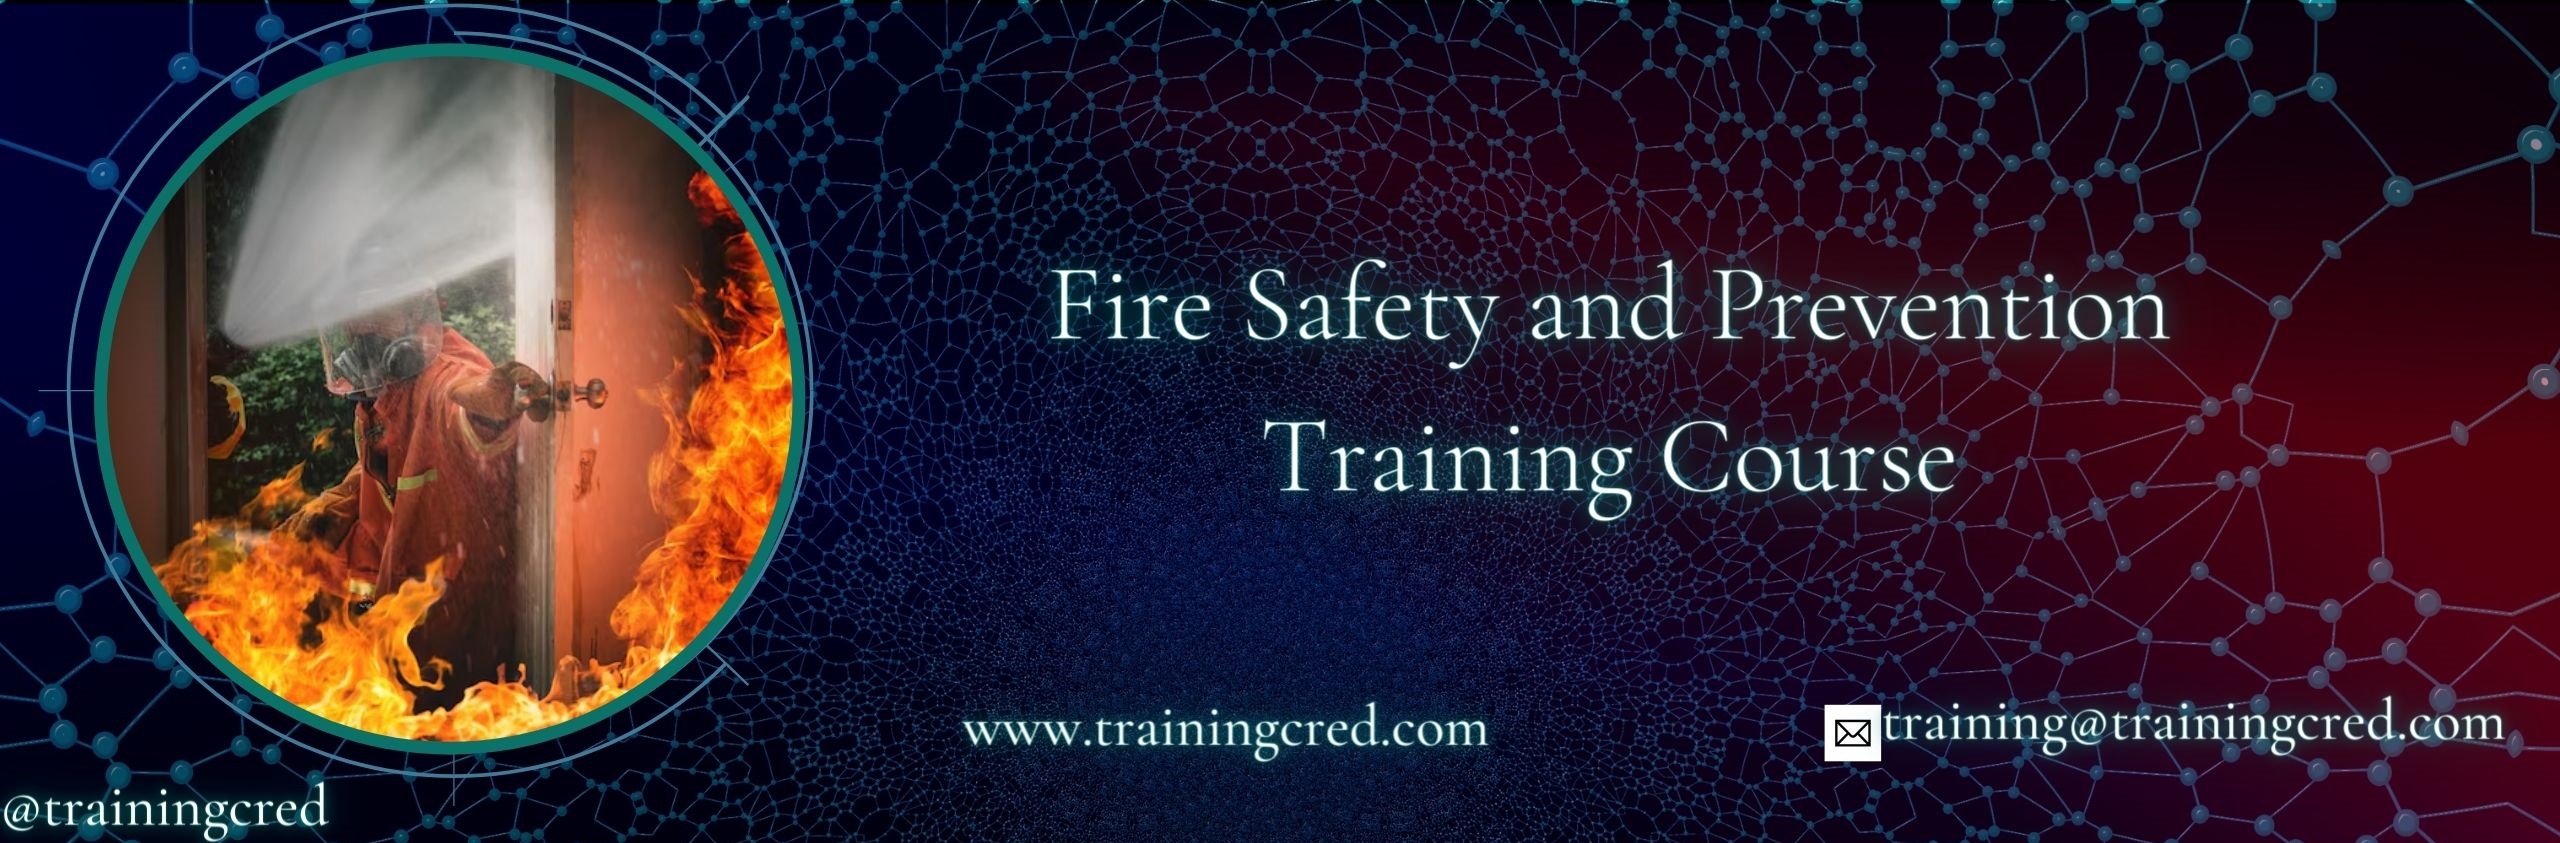 Fire Safety and Prevention Training